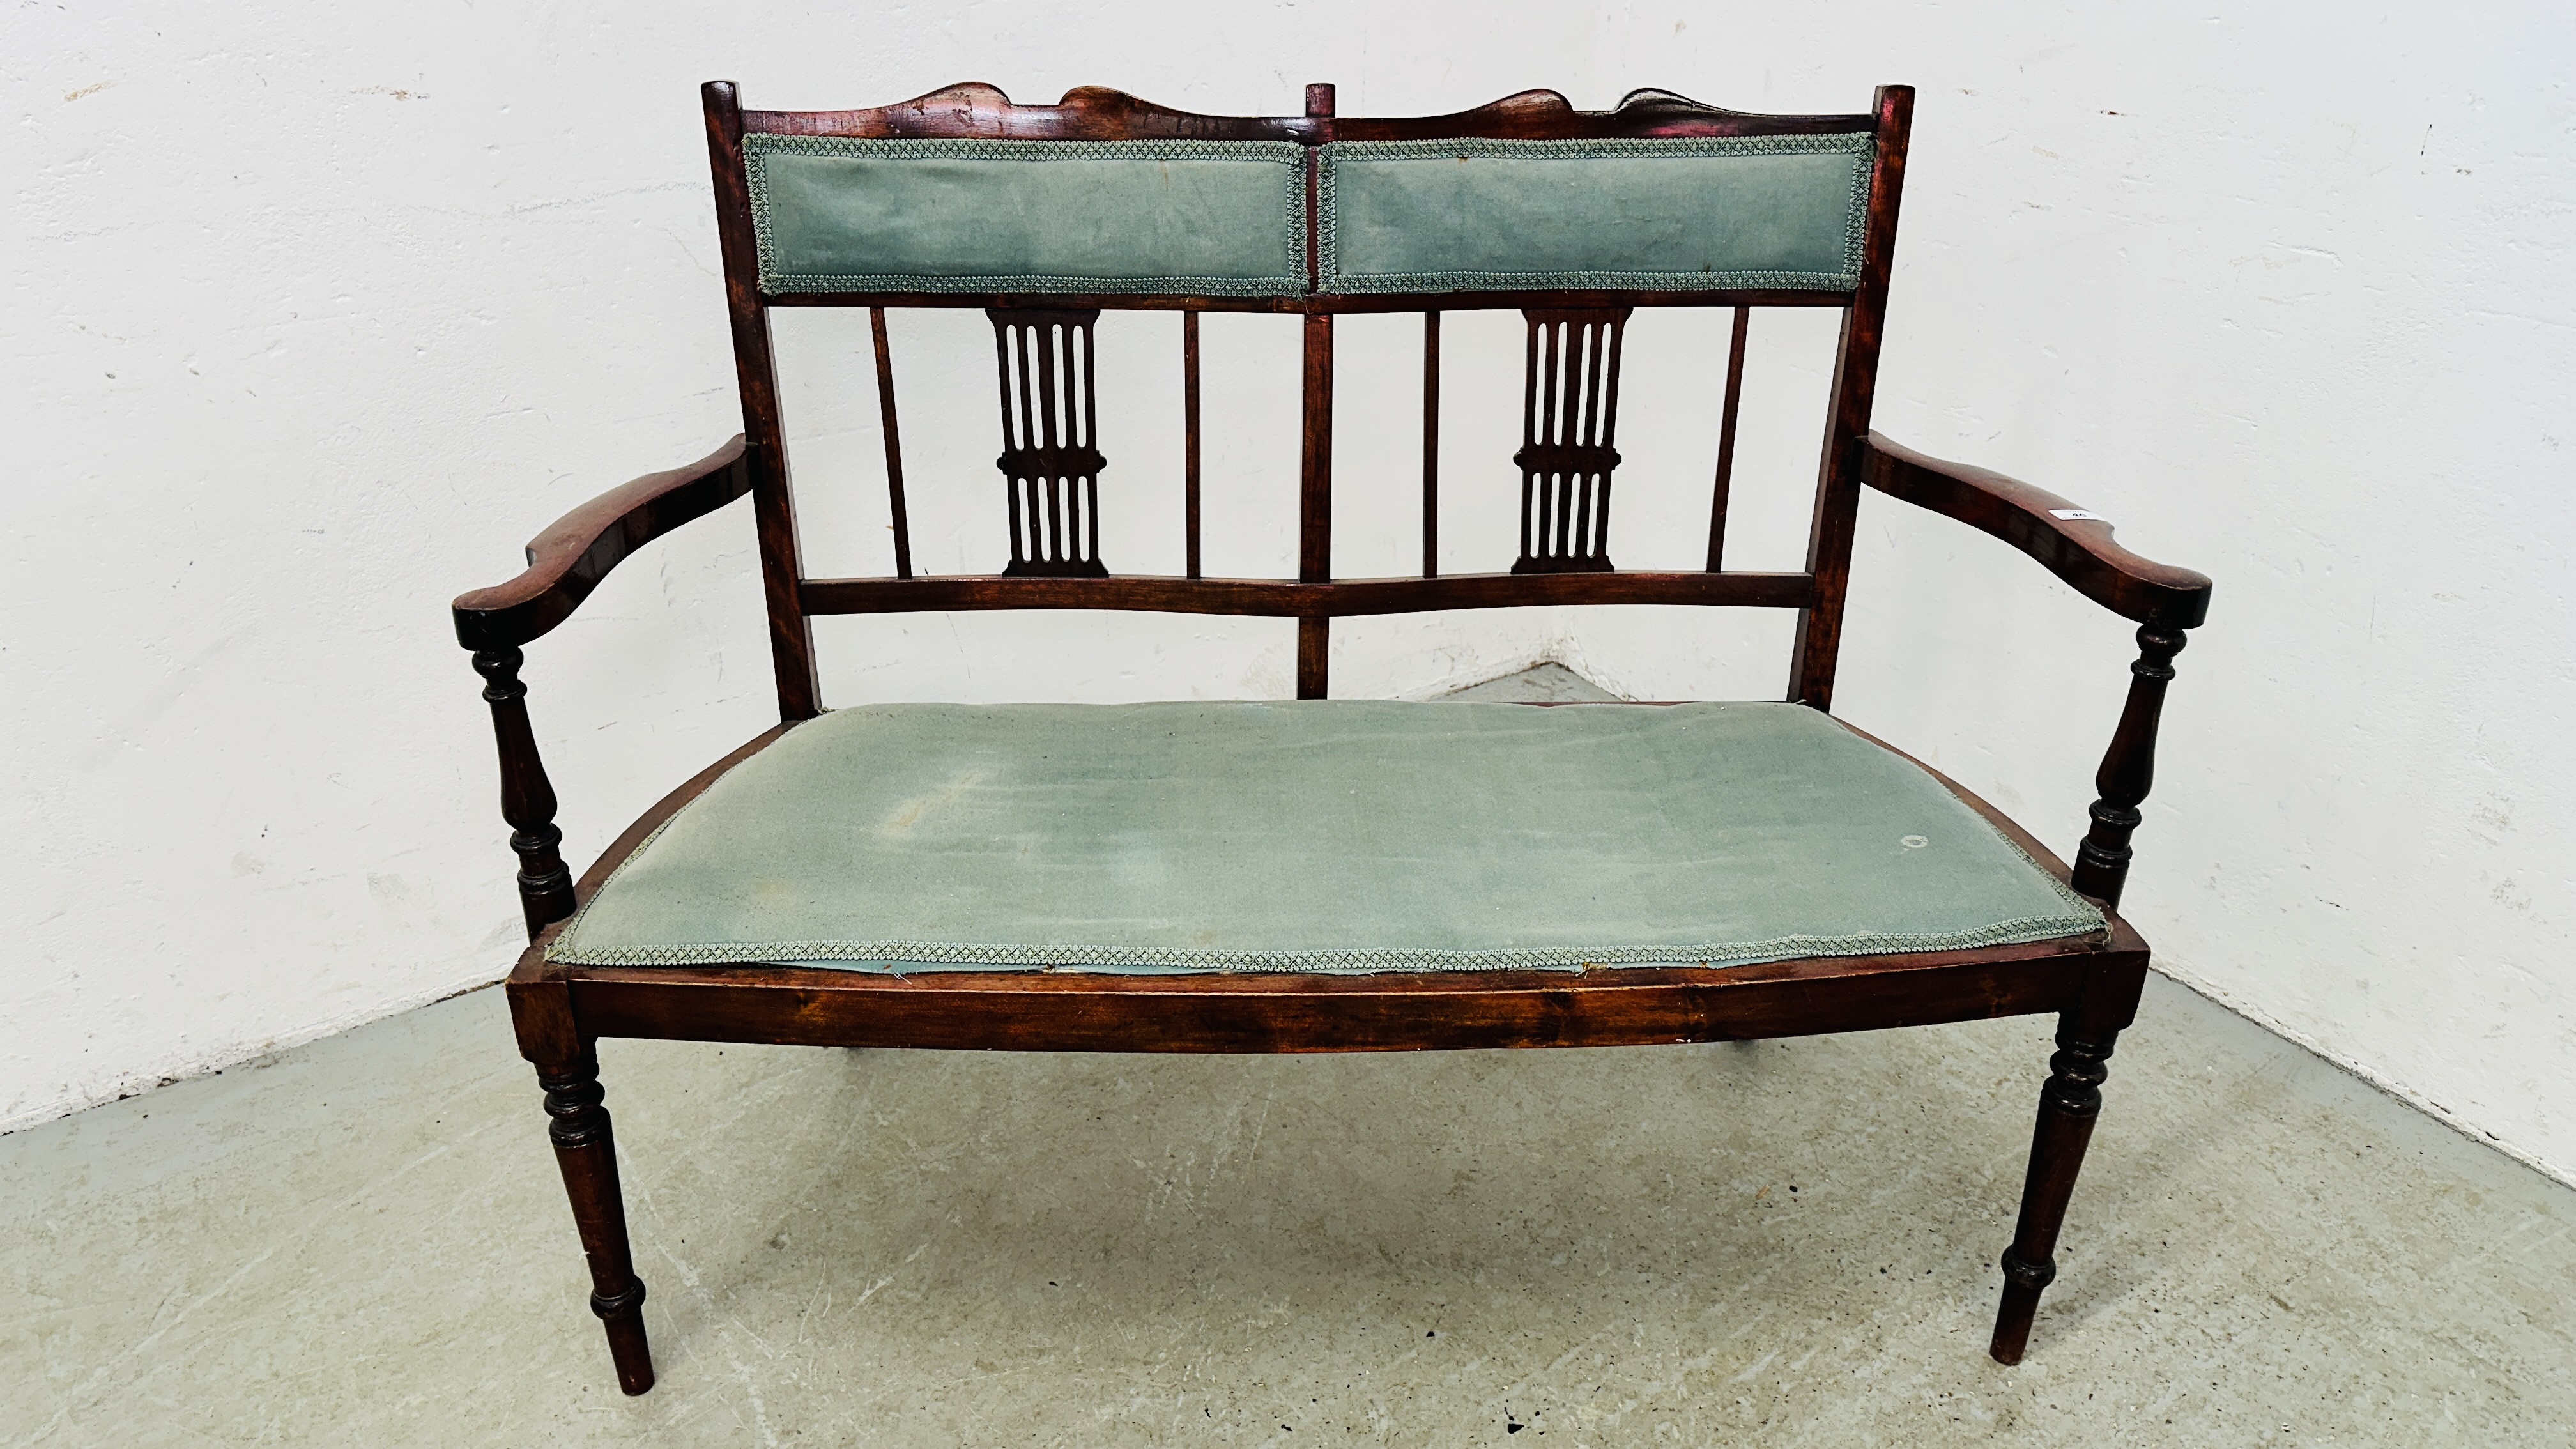 EDWARDIAN MAHOGANY 2 SEAT SOFA WITH FRETT WORK SUPPORT BACK AND GREEN UPHOLSTERY.